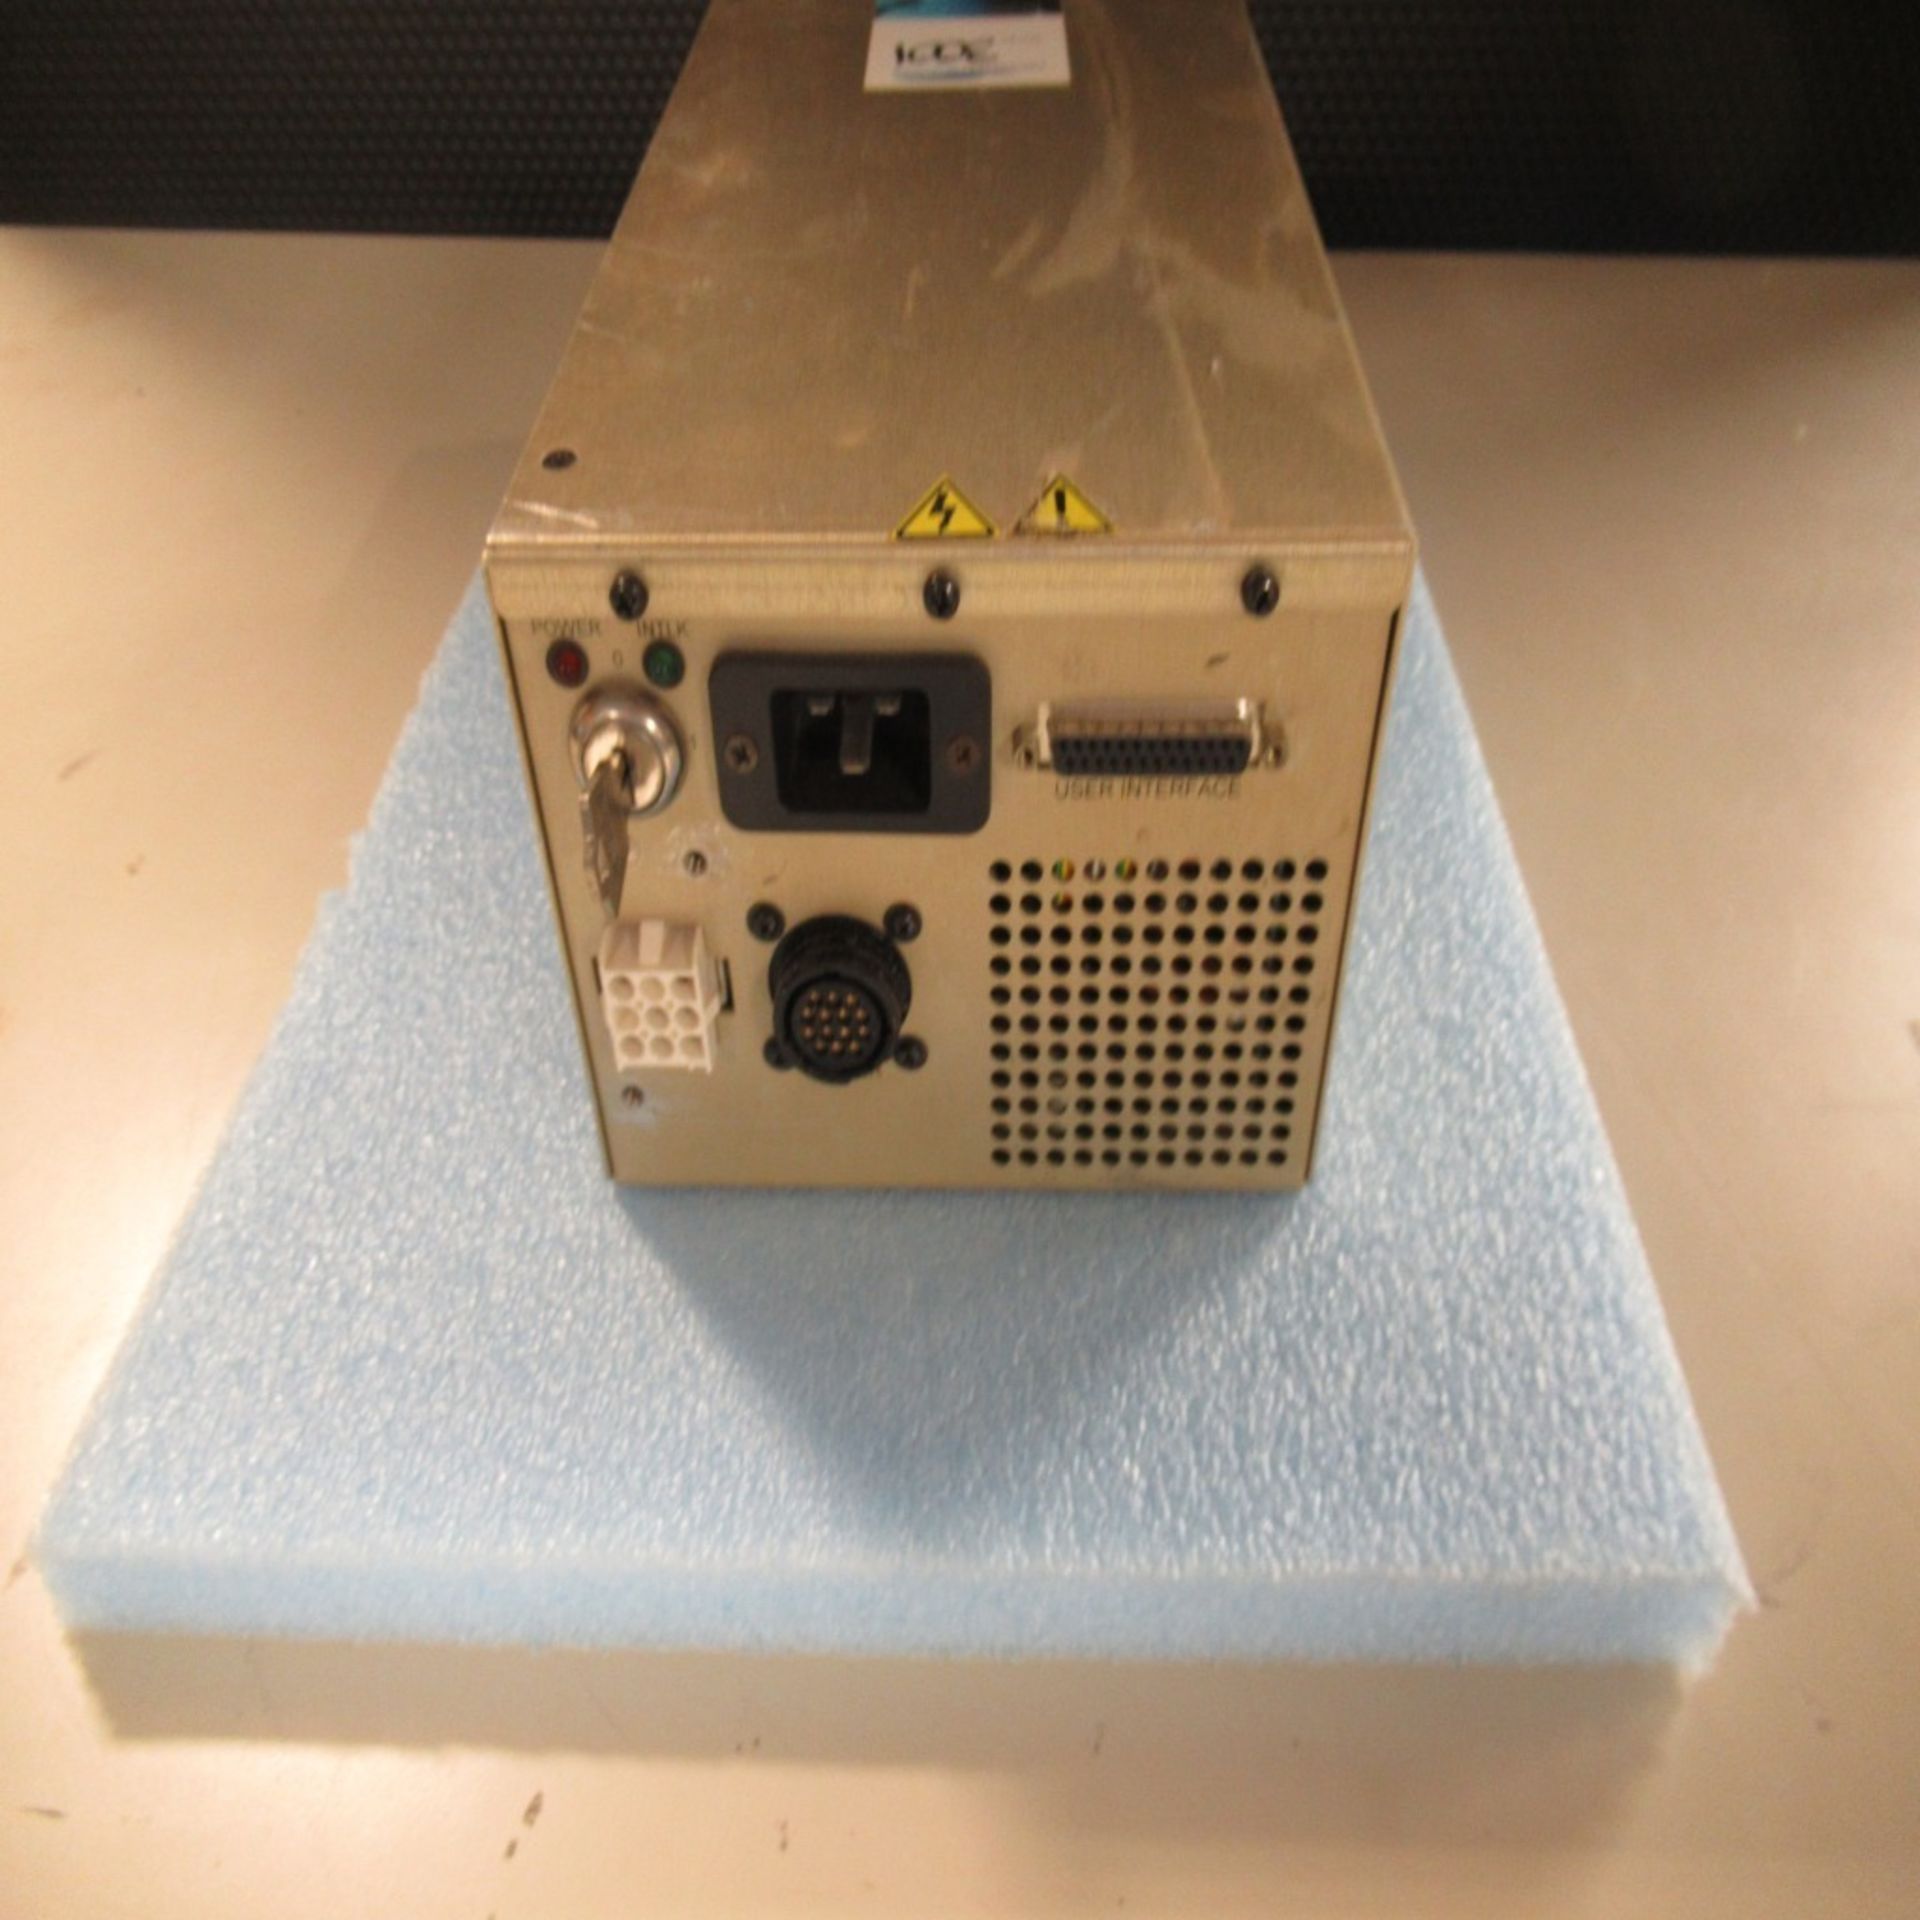 PHOTON SNAP SHOT MODEL 6000 *POWERS ON* NO SCREEN DISPLAY; FARNELL AP20-80 REGULATED POWER SUPPLY * - Image 112 of 222